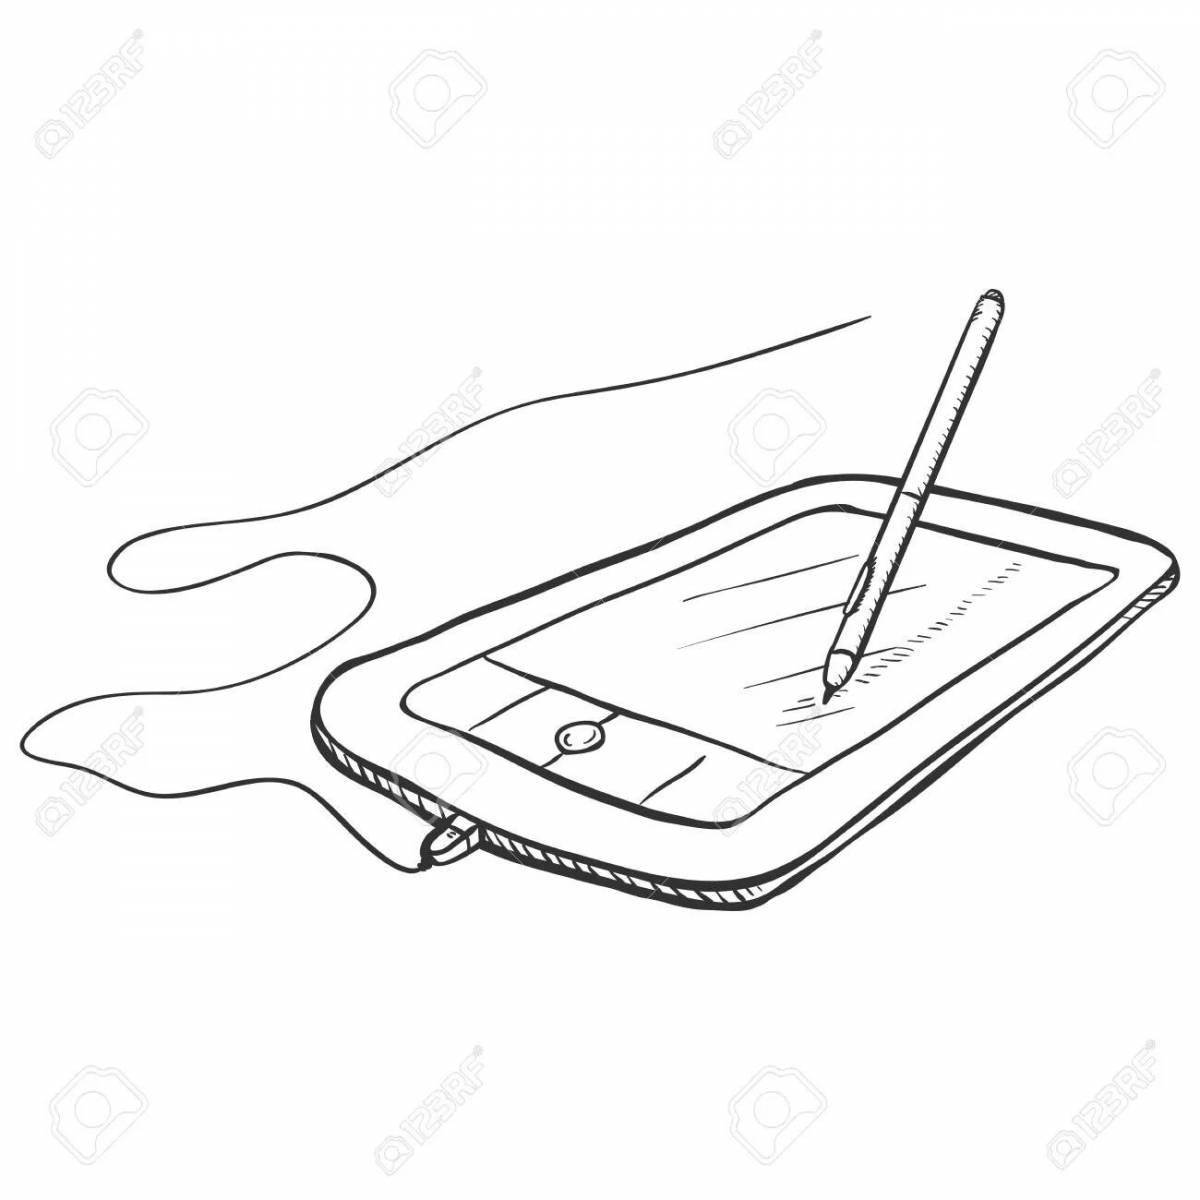 Ipad coloring book with stylus